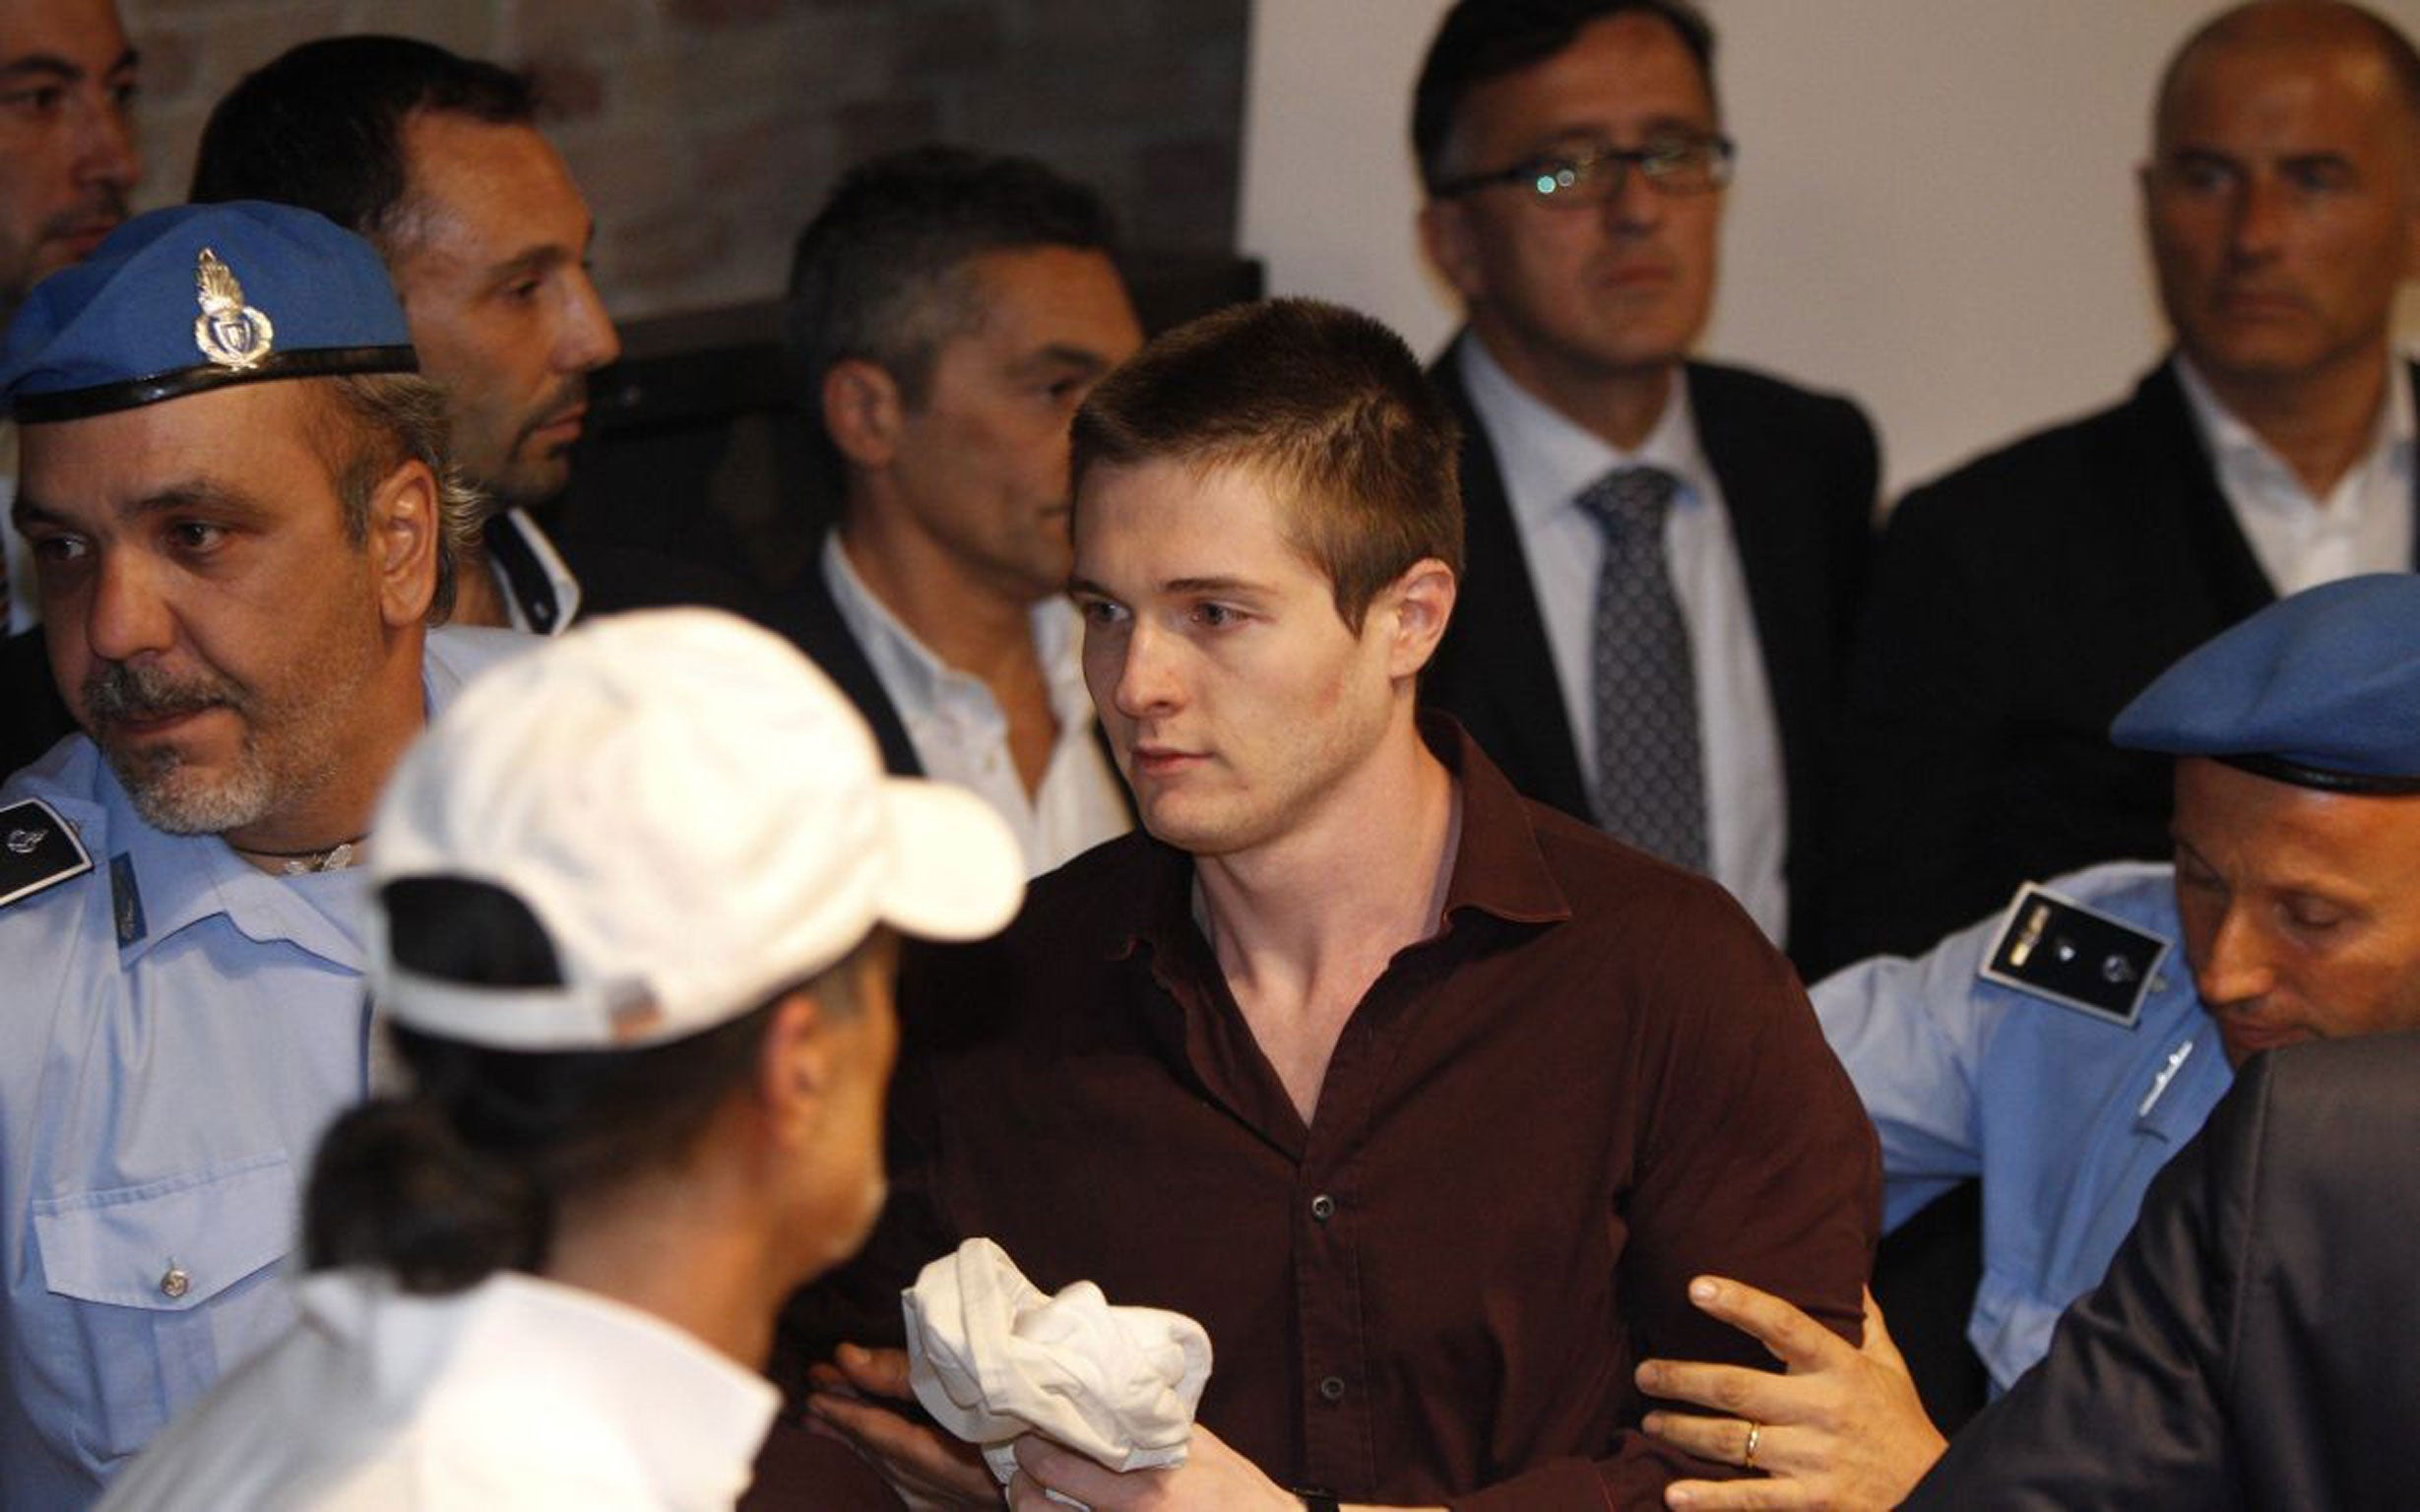 Raffaele Sollecito after being acquitted of Ms Kercher's murder in 2011